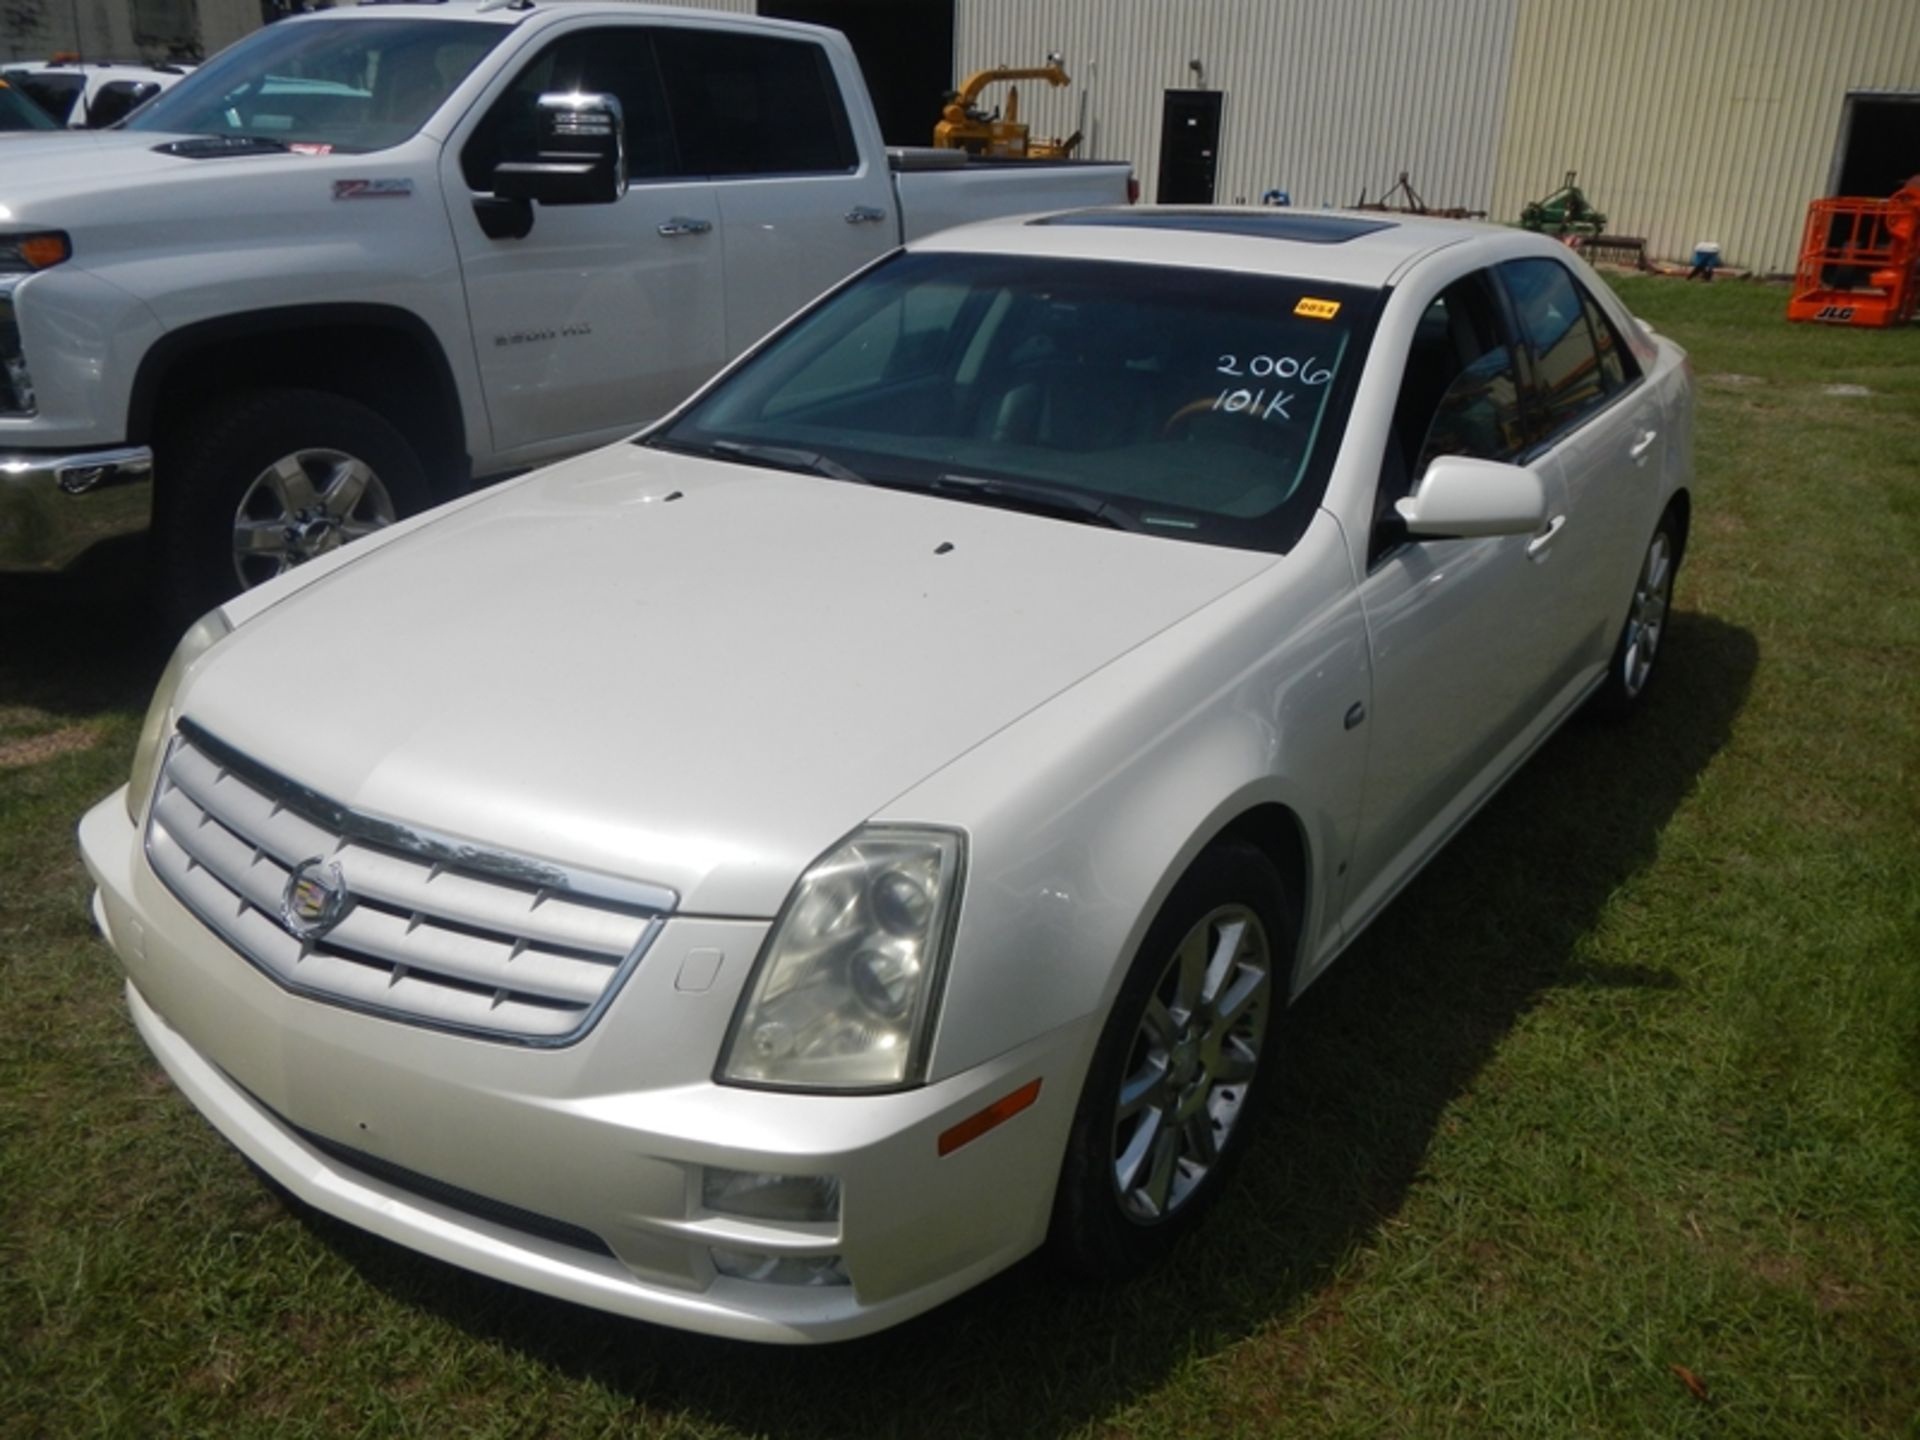 2006 CADILLAC DTS 4-door sedan wrecked wrecked on passenger side, 101,135 miles- 1G6DC67A360220772